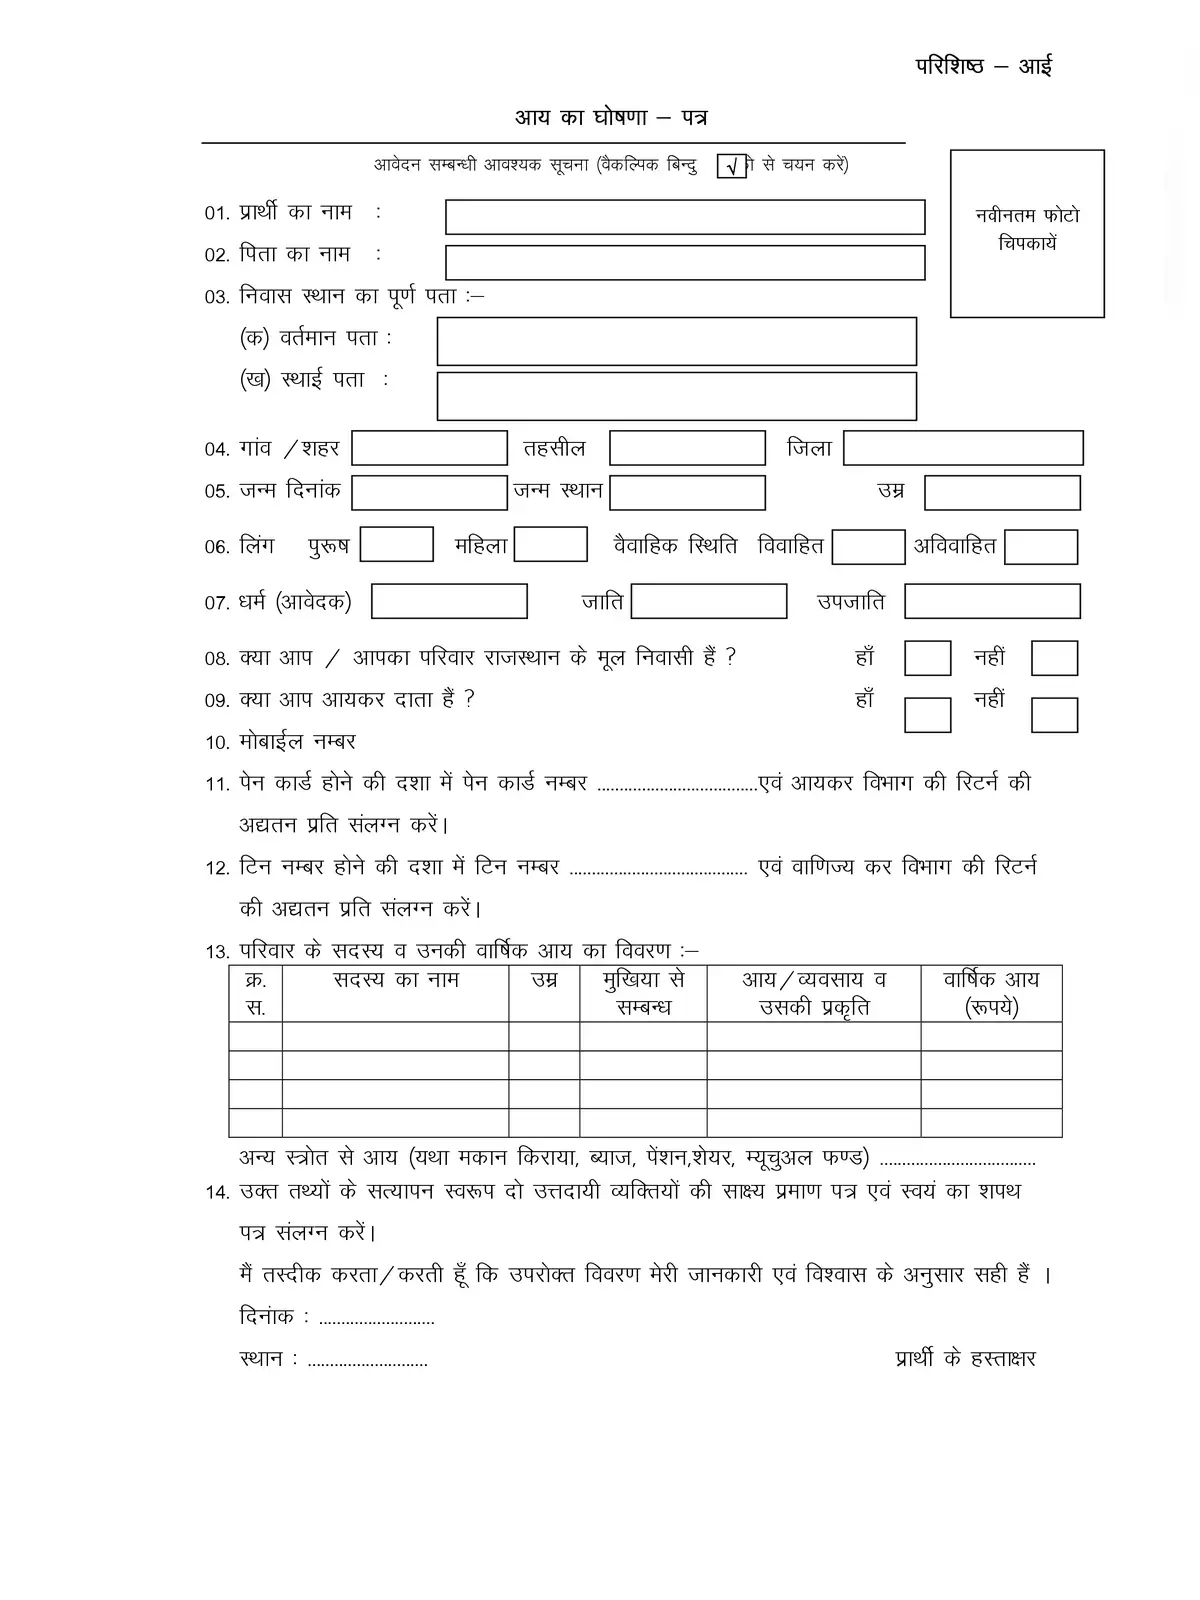 Rajasthan Income Certificate Form